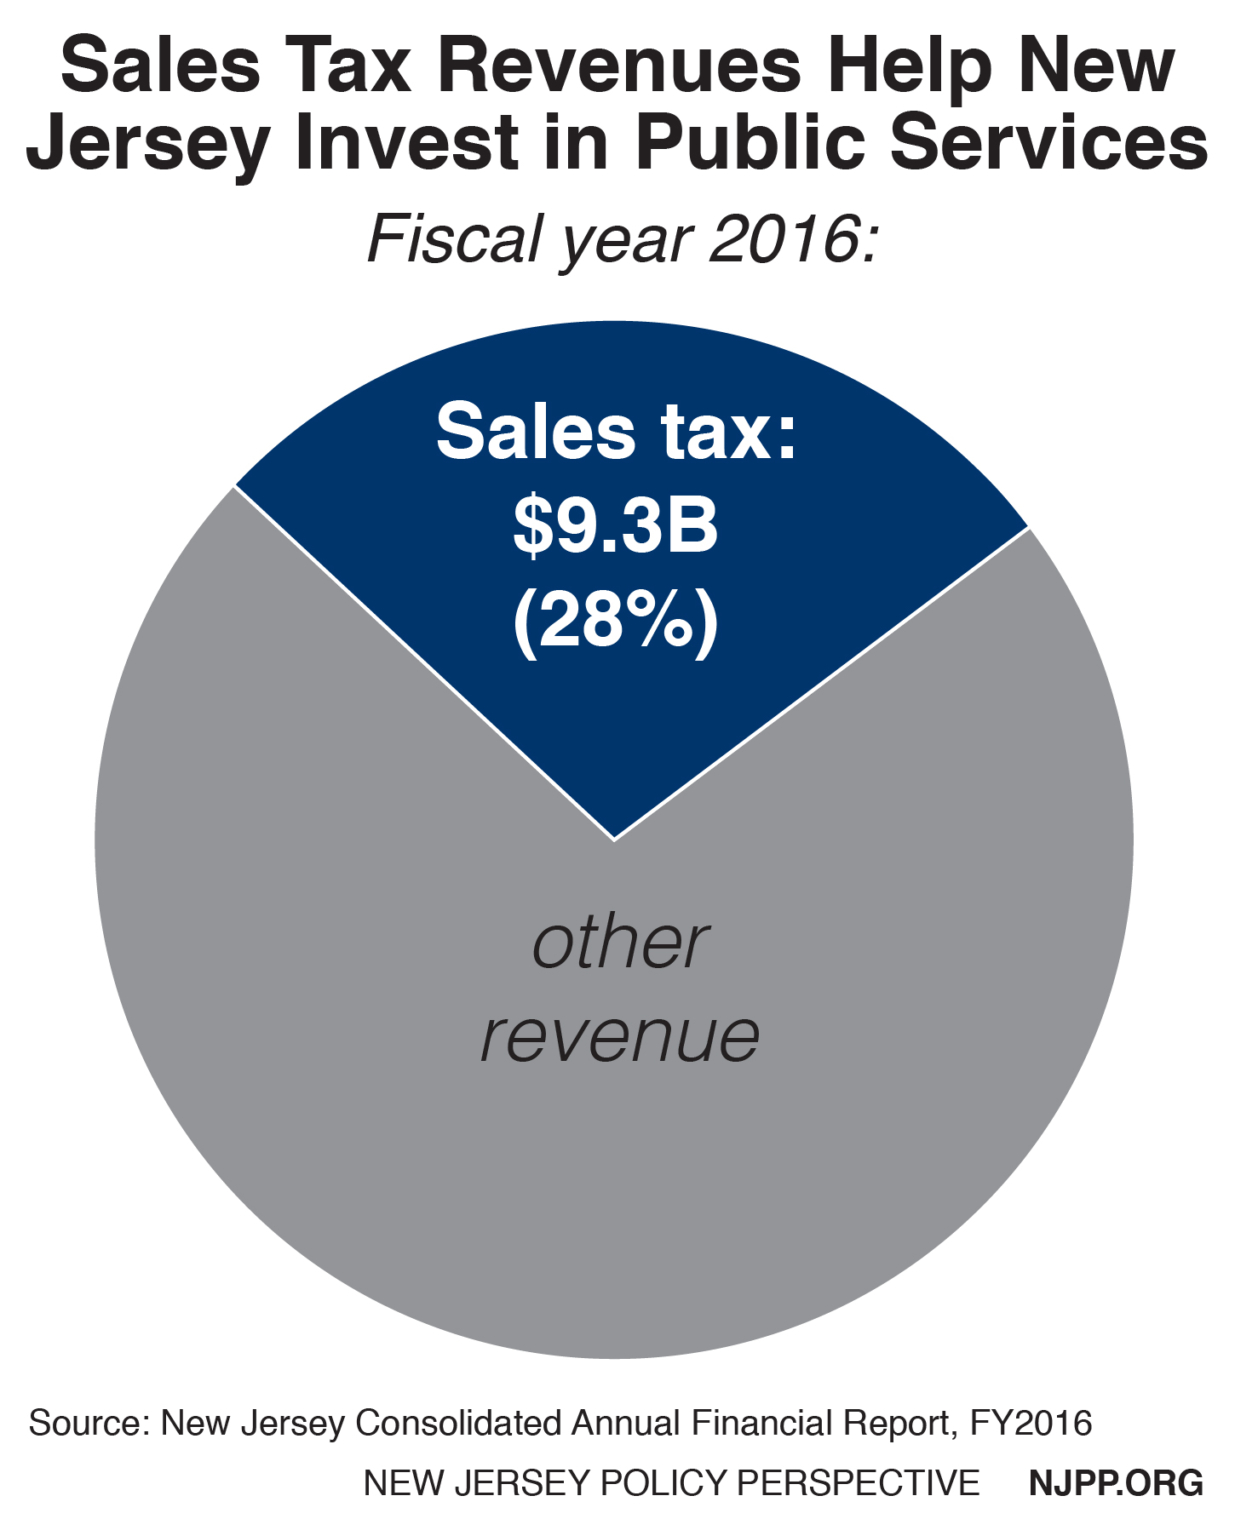 Modernizing New Jersey’s Sales Tax Will Level the Playing Field and